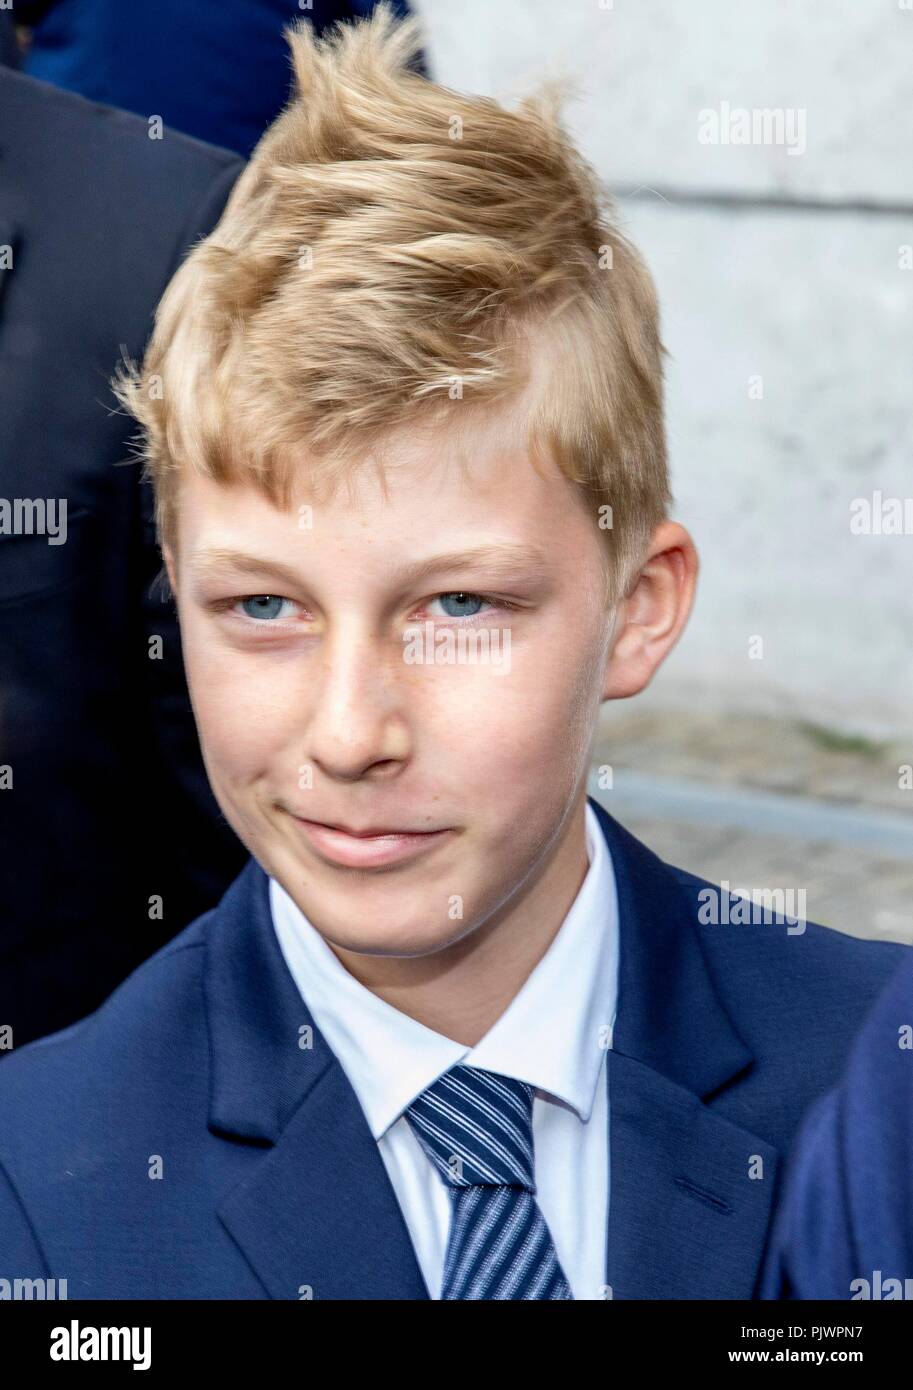 brussel-belgium-08th-sep-2018-prince-emmanuel-of-belgium-leave-at-the-onze-lieve-vrouwekerk-in-laken-on-september-8-2018-after-attending-the-eucharistic-celebration-at-the-occasion-of-the-25th-anniversary-of-the-death-of-hm-king-boudewijn-photo-albert-nieboer-netherlands-outpoint-de-vue-out-credit-dpaalamy-live-news-PJWPN7.jpg